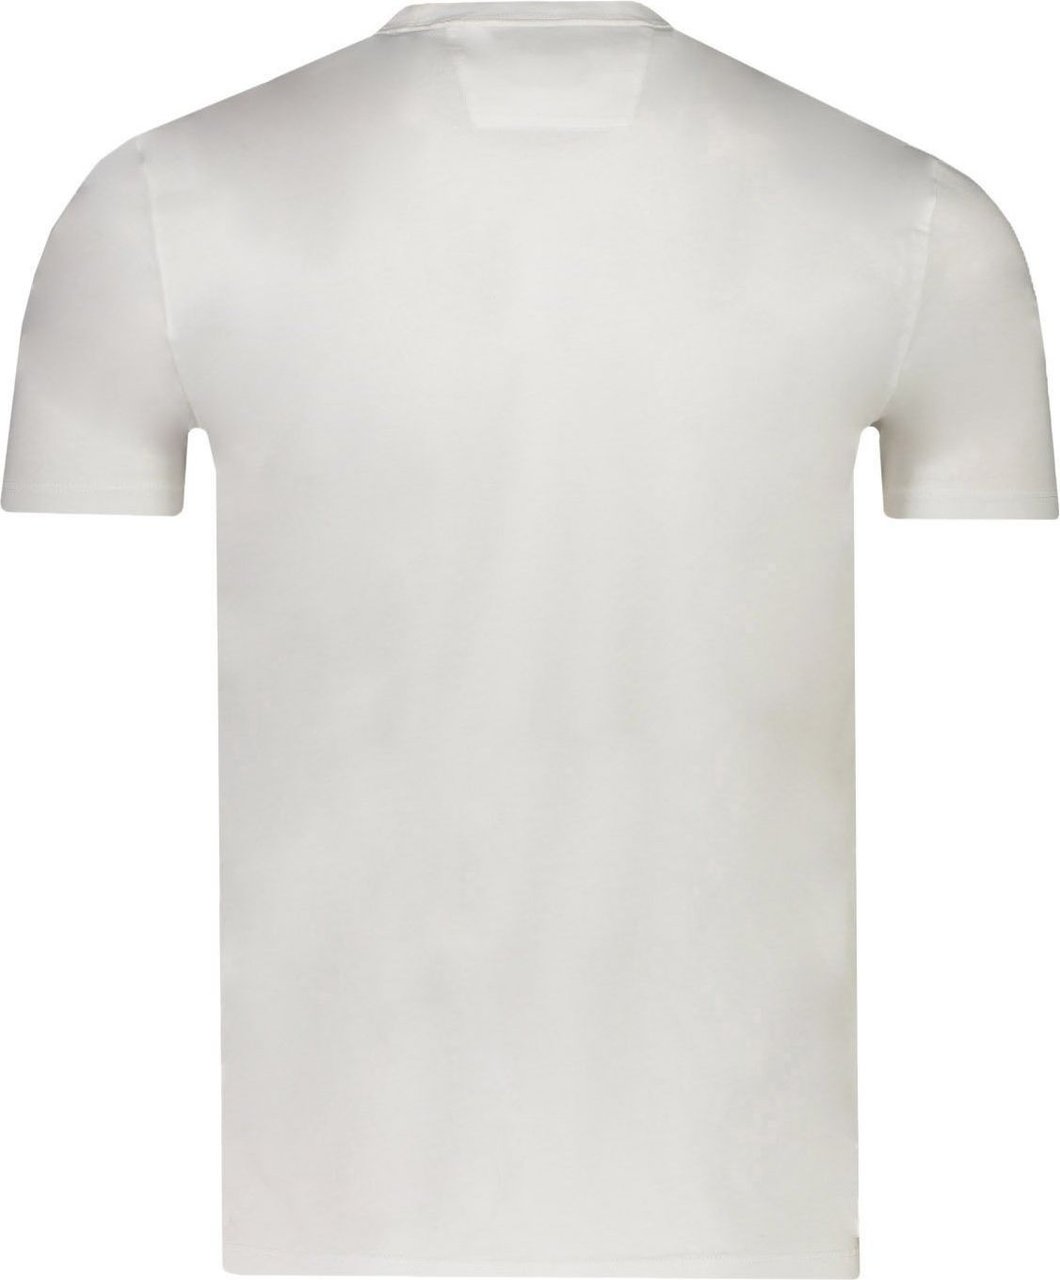 CP Company C.p. Company T-shirt Wit Wit